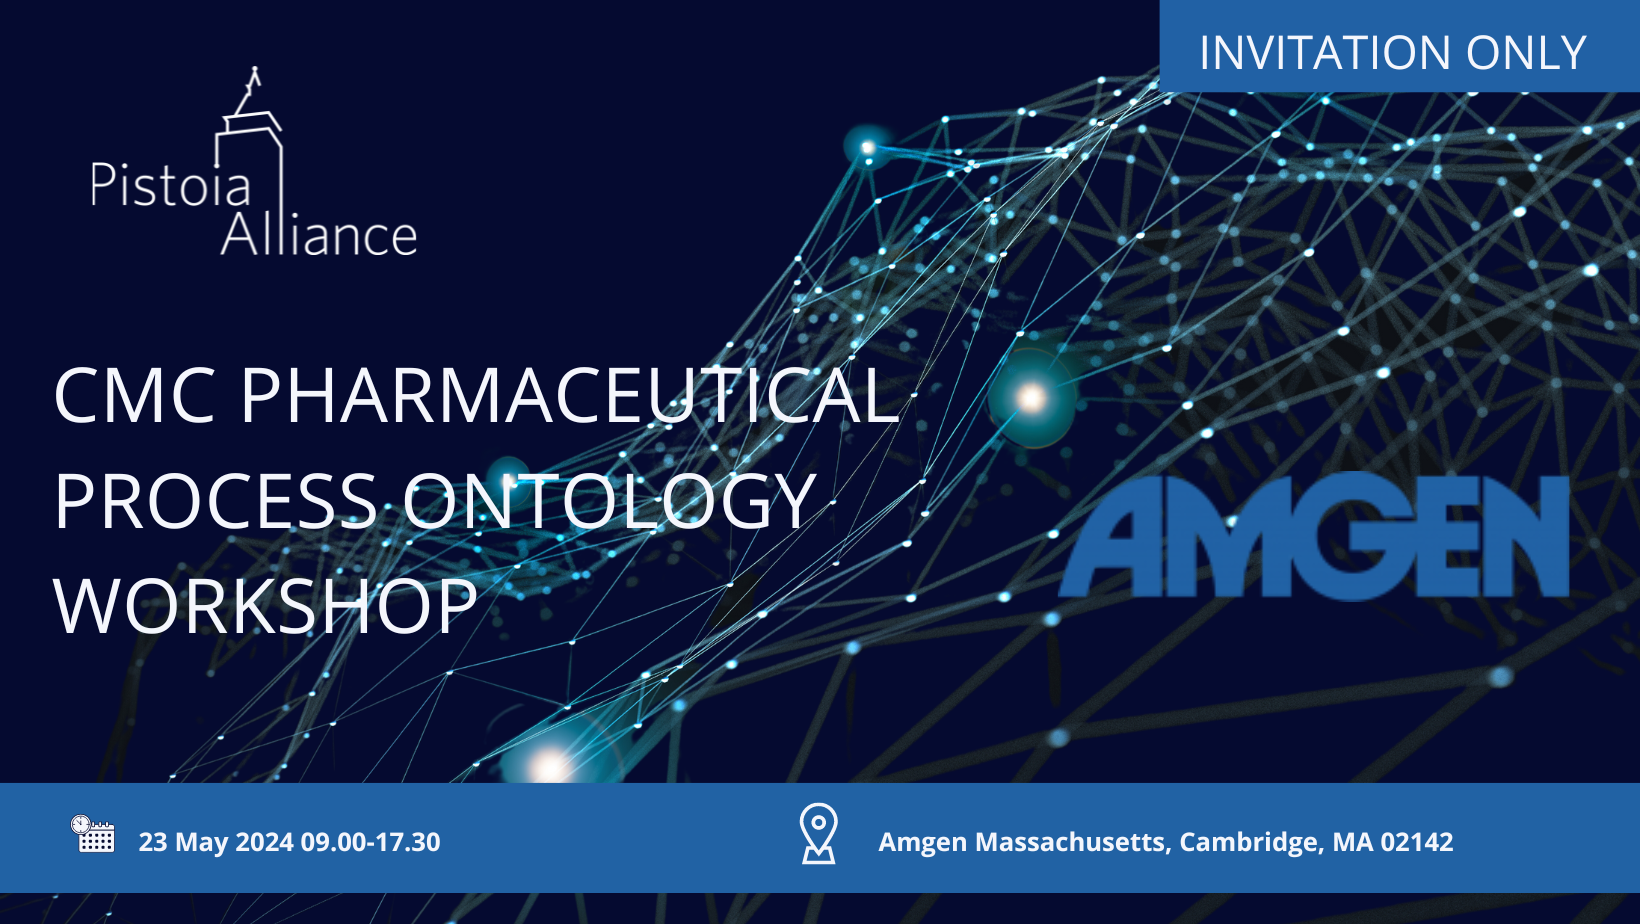 Pharmaceutical CMC Process Ontology workshop - Invitation Only